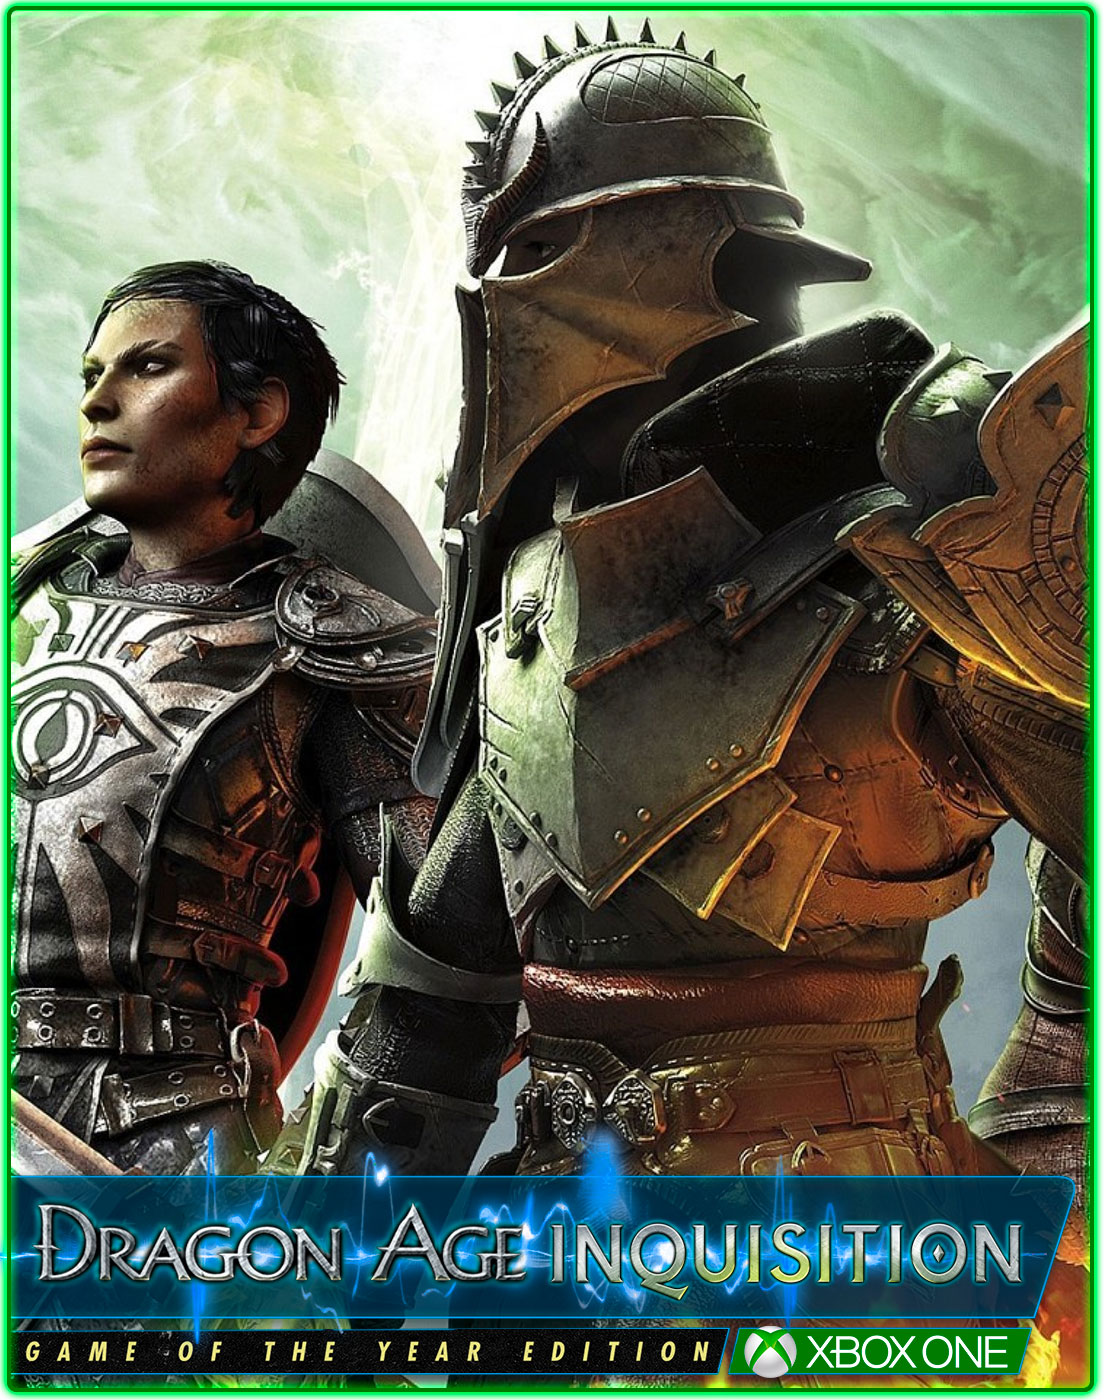 Dragon Age Inquisition Game of the Year Editi XBOX ONE.